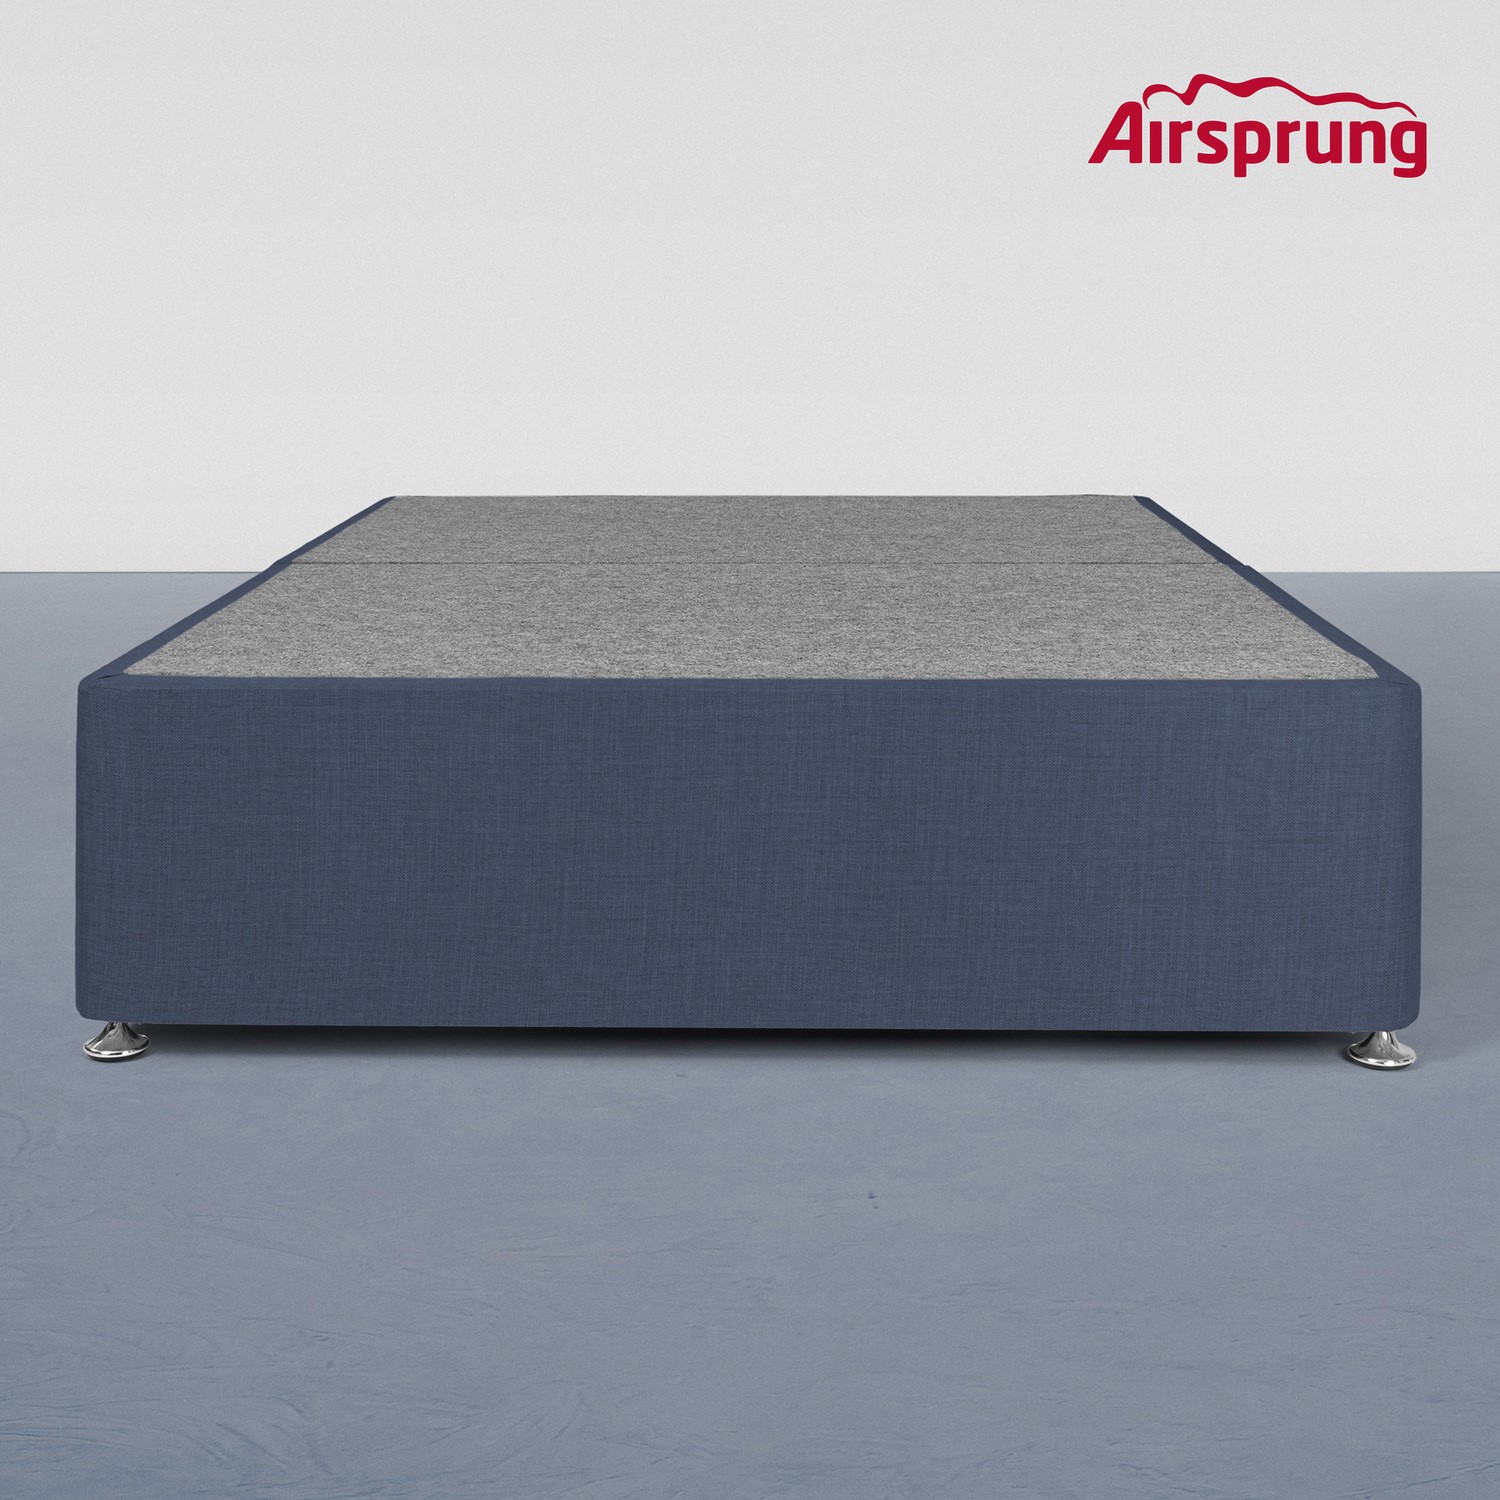 Read more about Airsprung kelston small double divan midnight blue